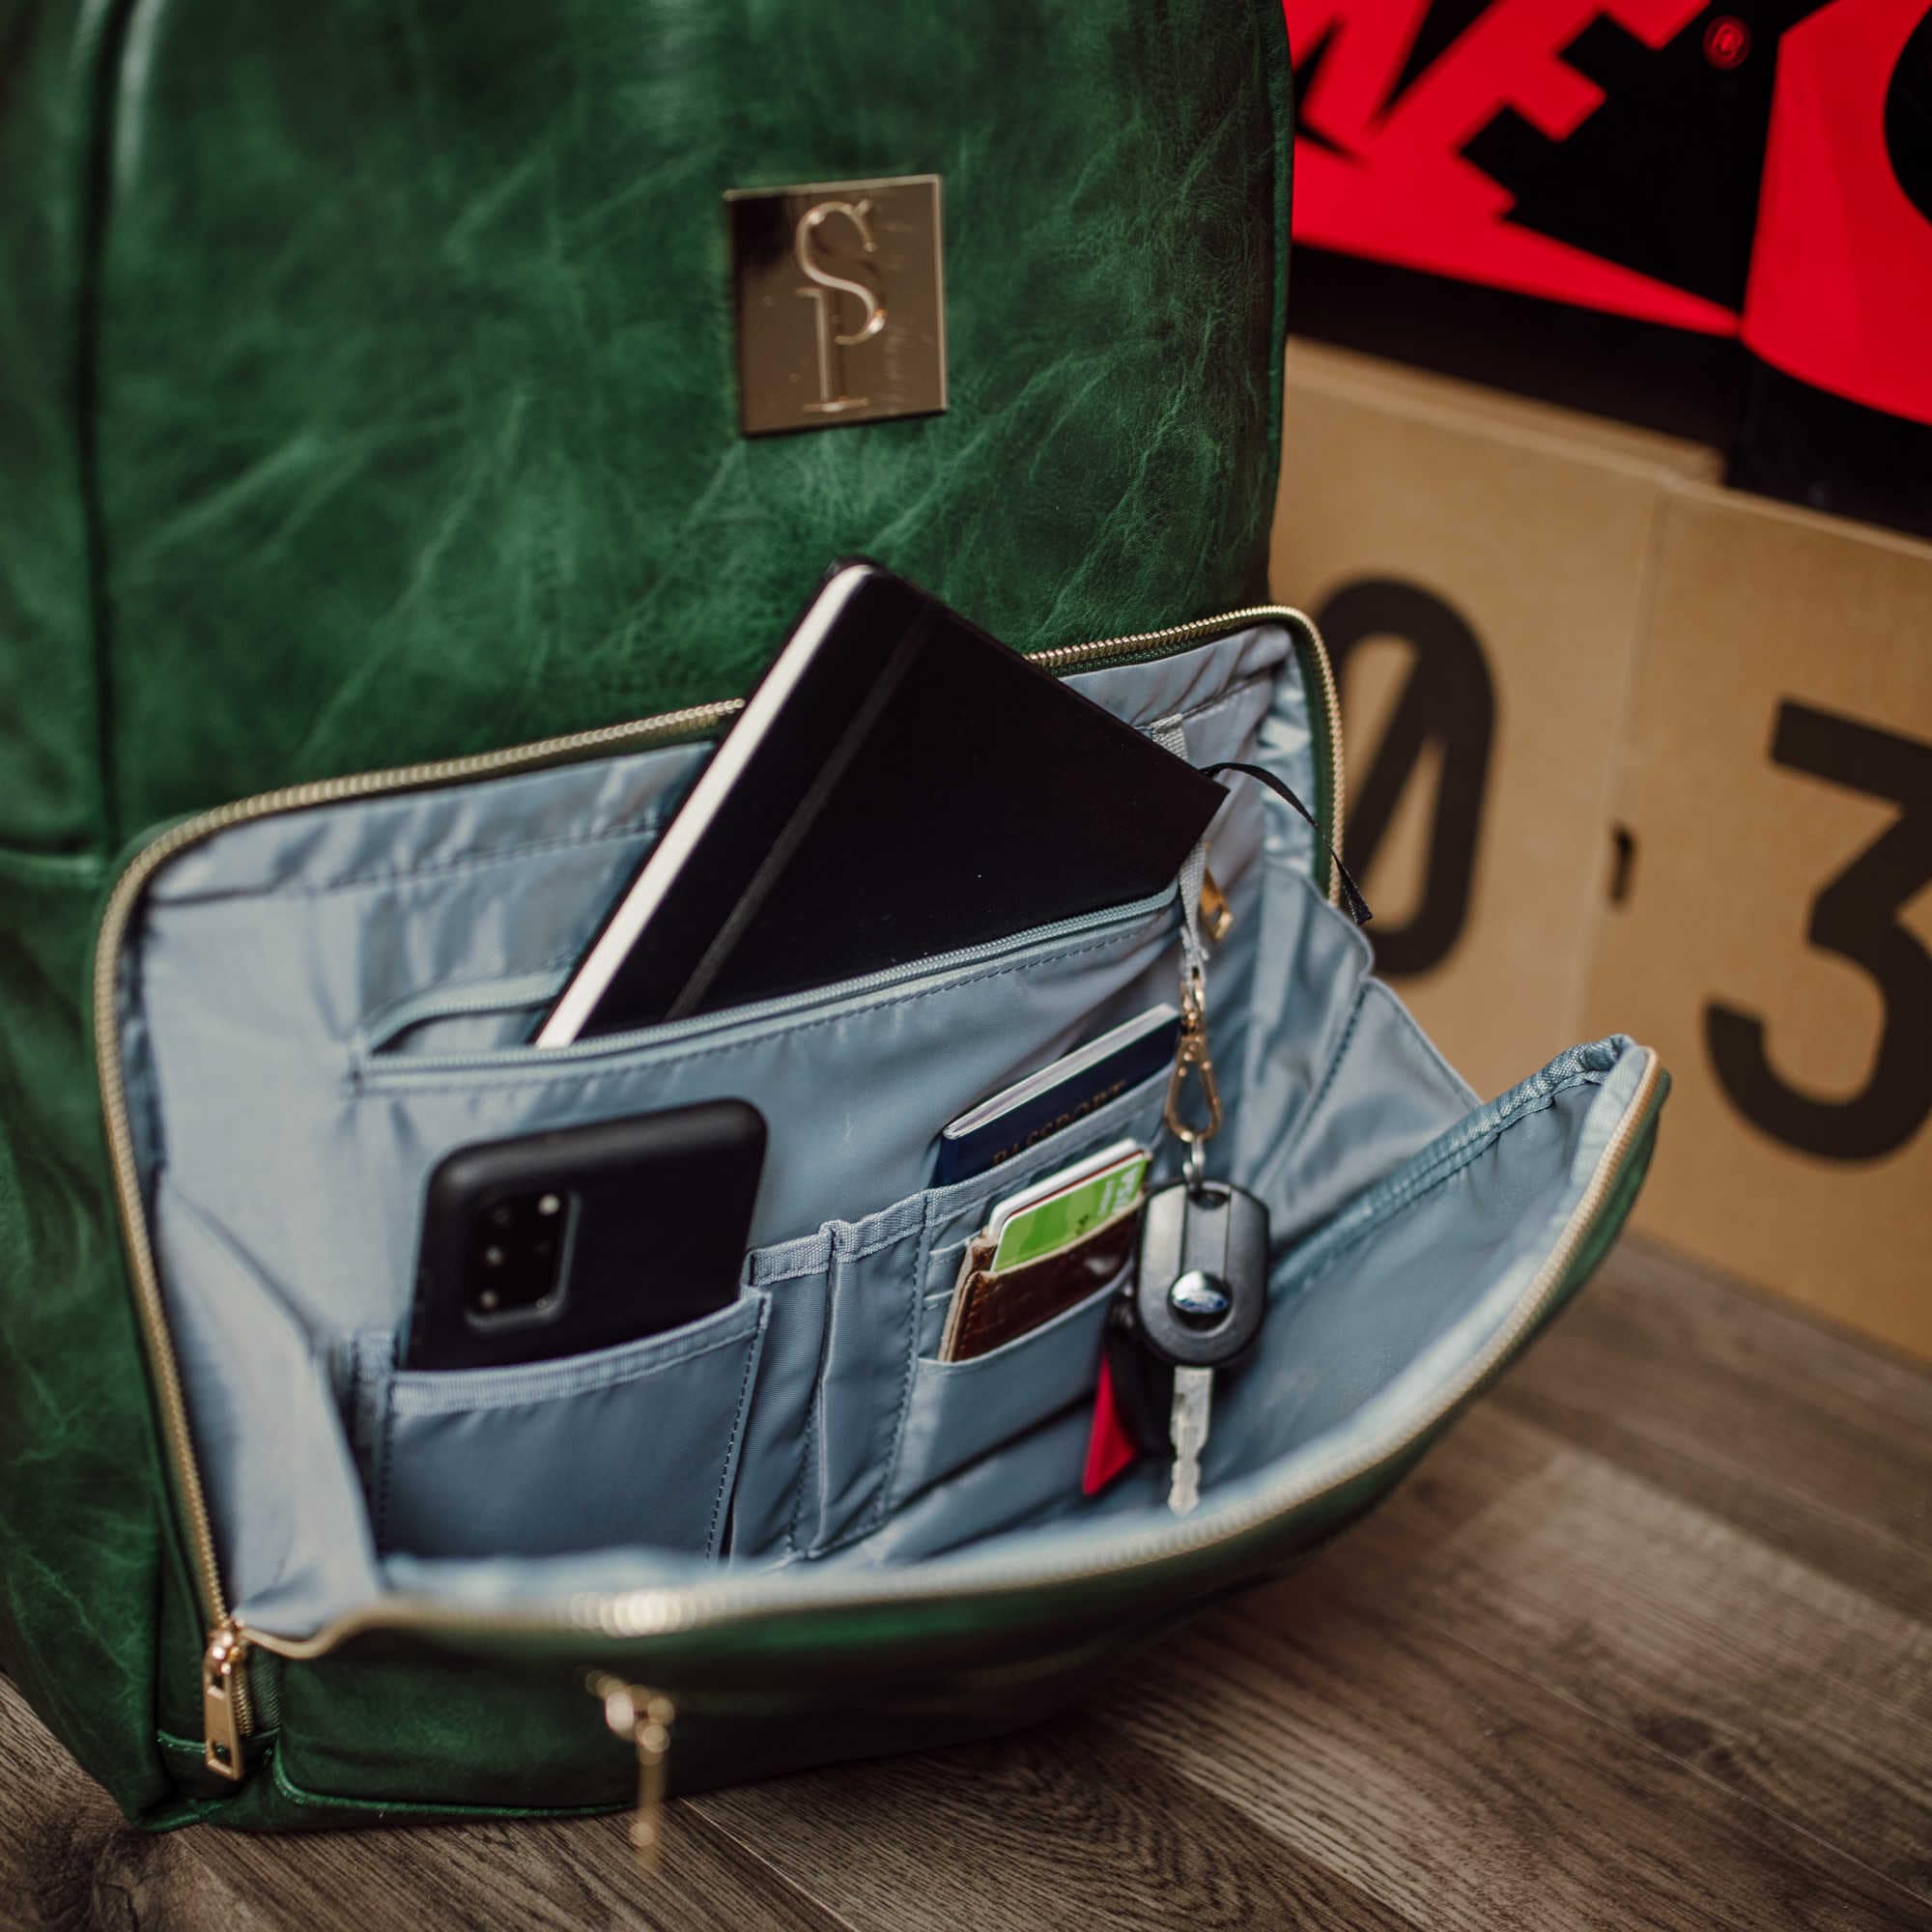 Emerald Green Tumbled Leather Commuter Bag - Sole Premise